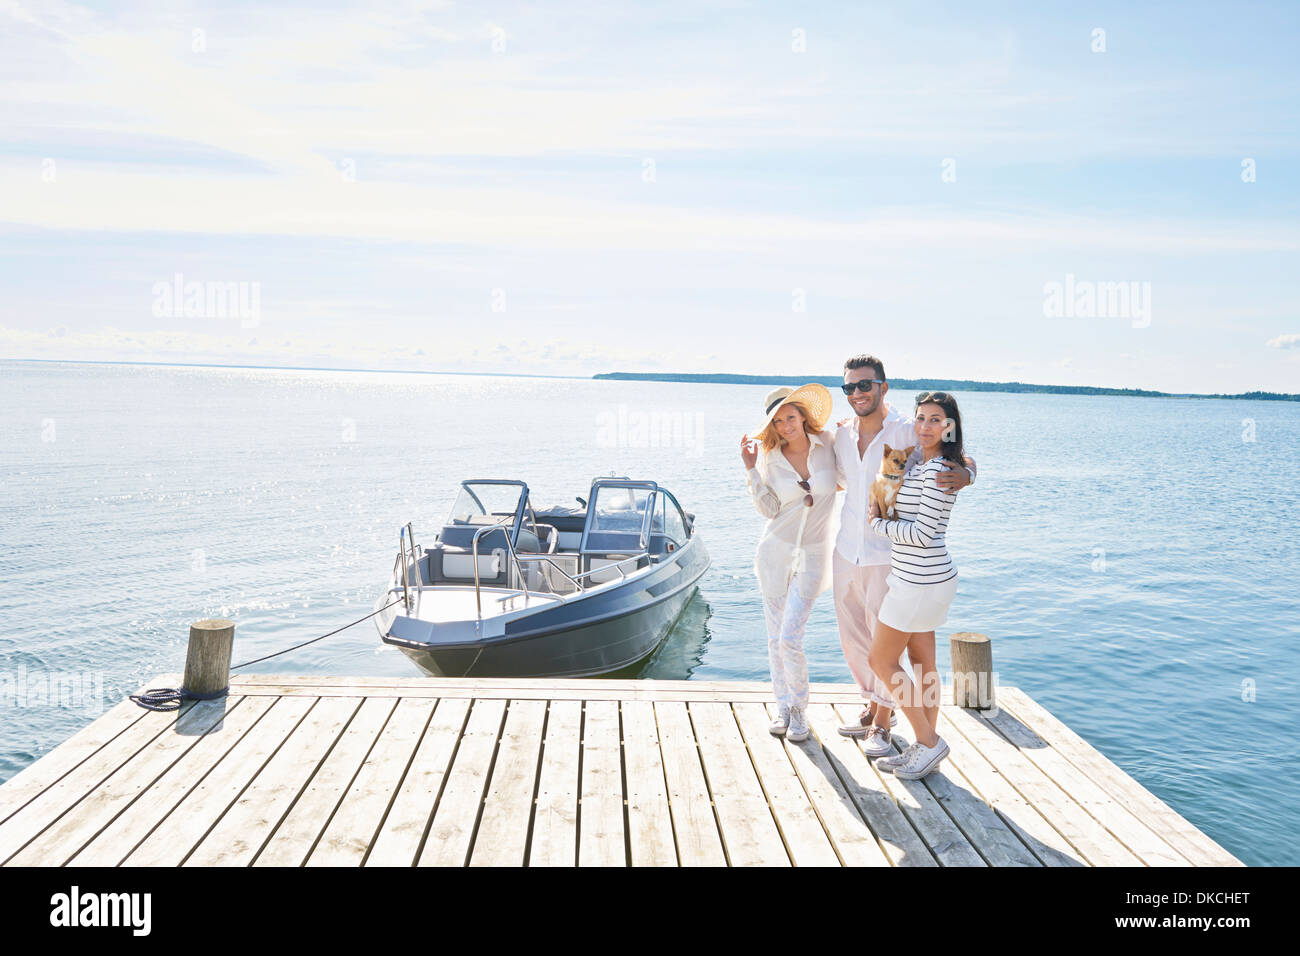 Young adults on pier with boat, Gavle, Sweden Stock Photo